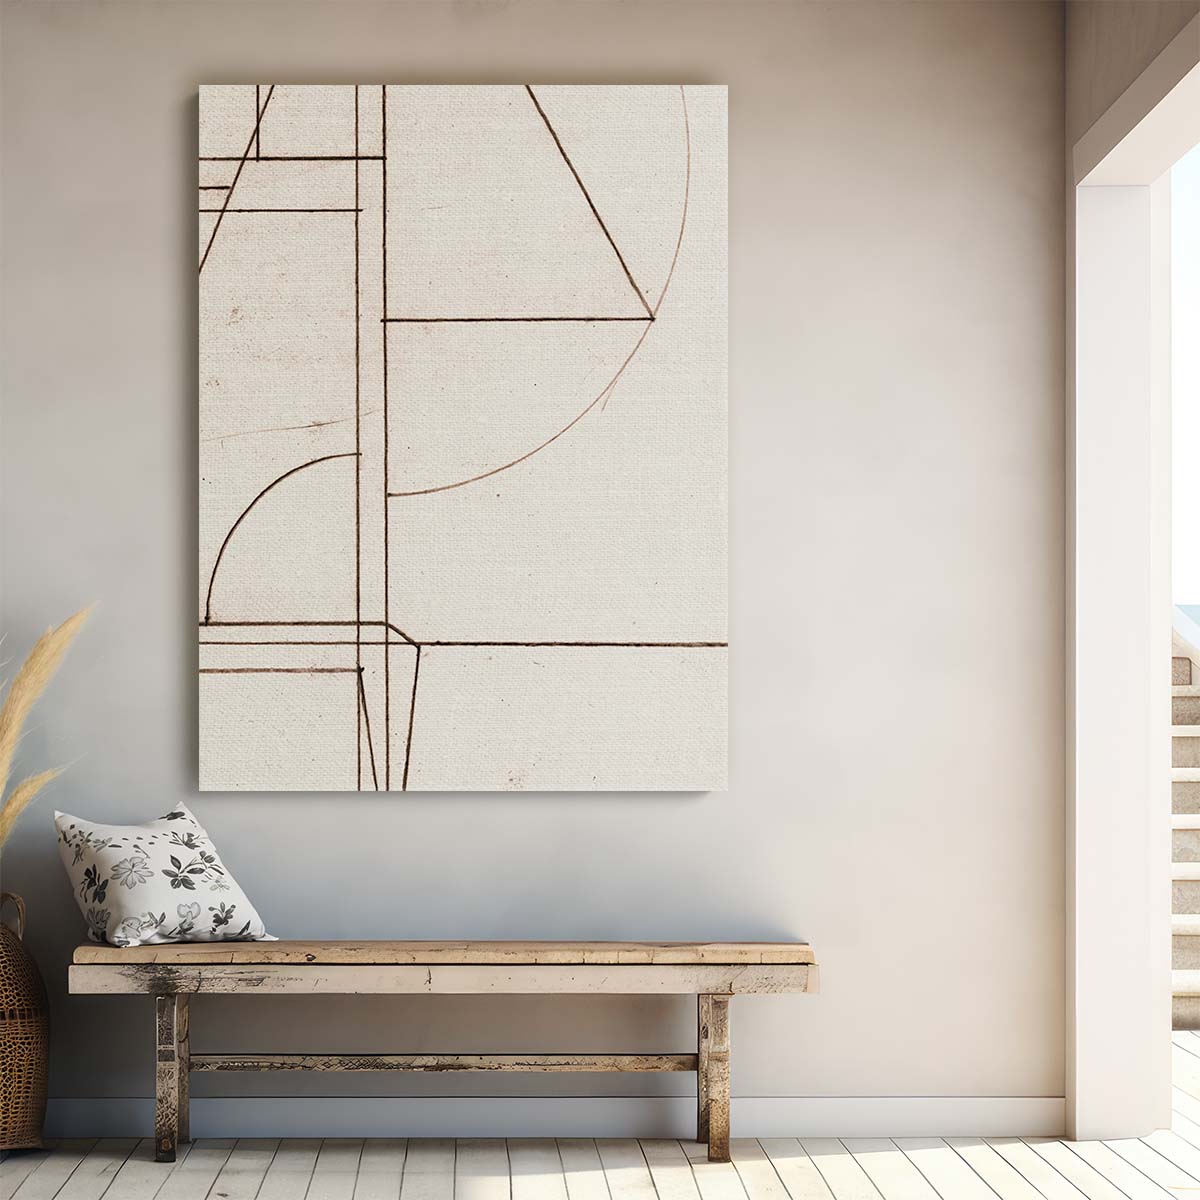 Abstract Geometric Line Art Illustration by Dan Hobday, Minmod No2 by Luxuriance Designs, made in USA